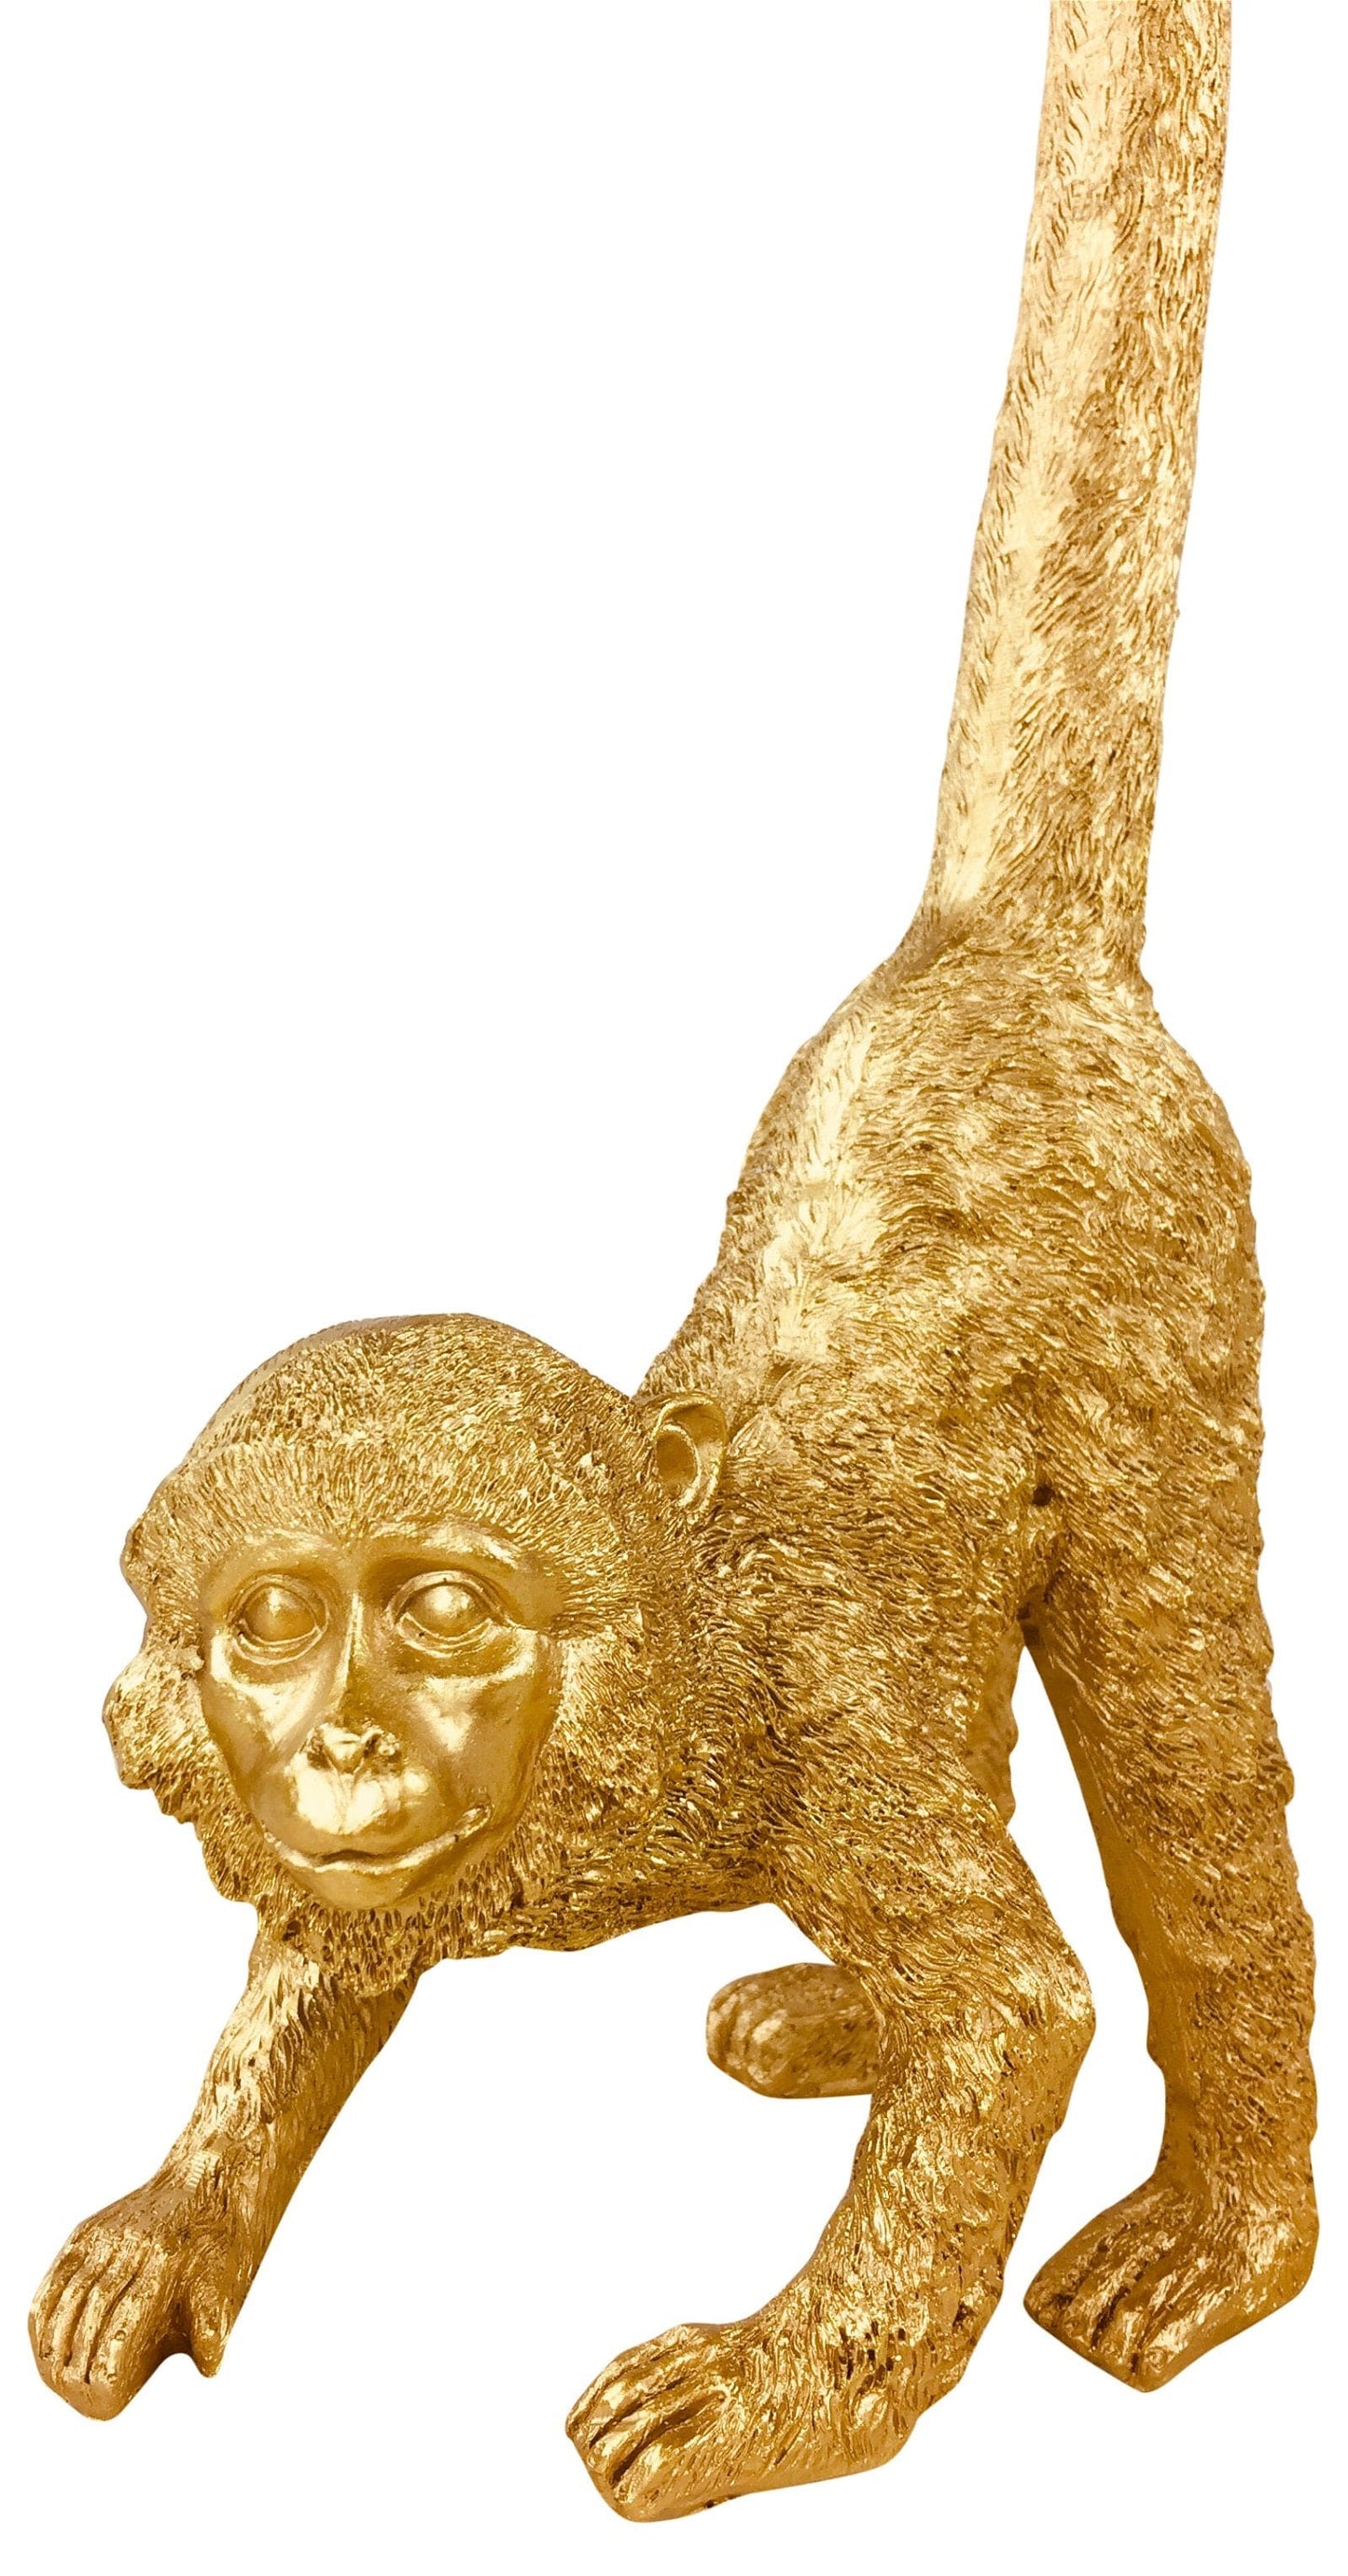 Curly Tailed Resin Monkey Ornament 43cm - Kaftan direct